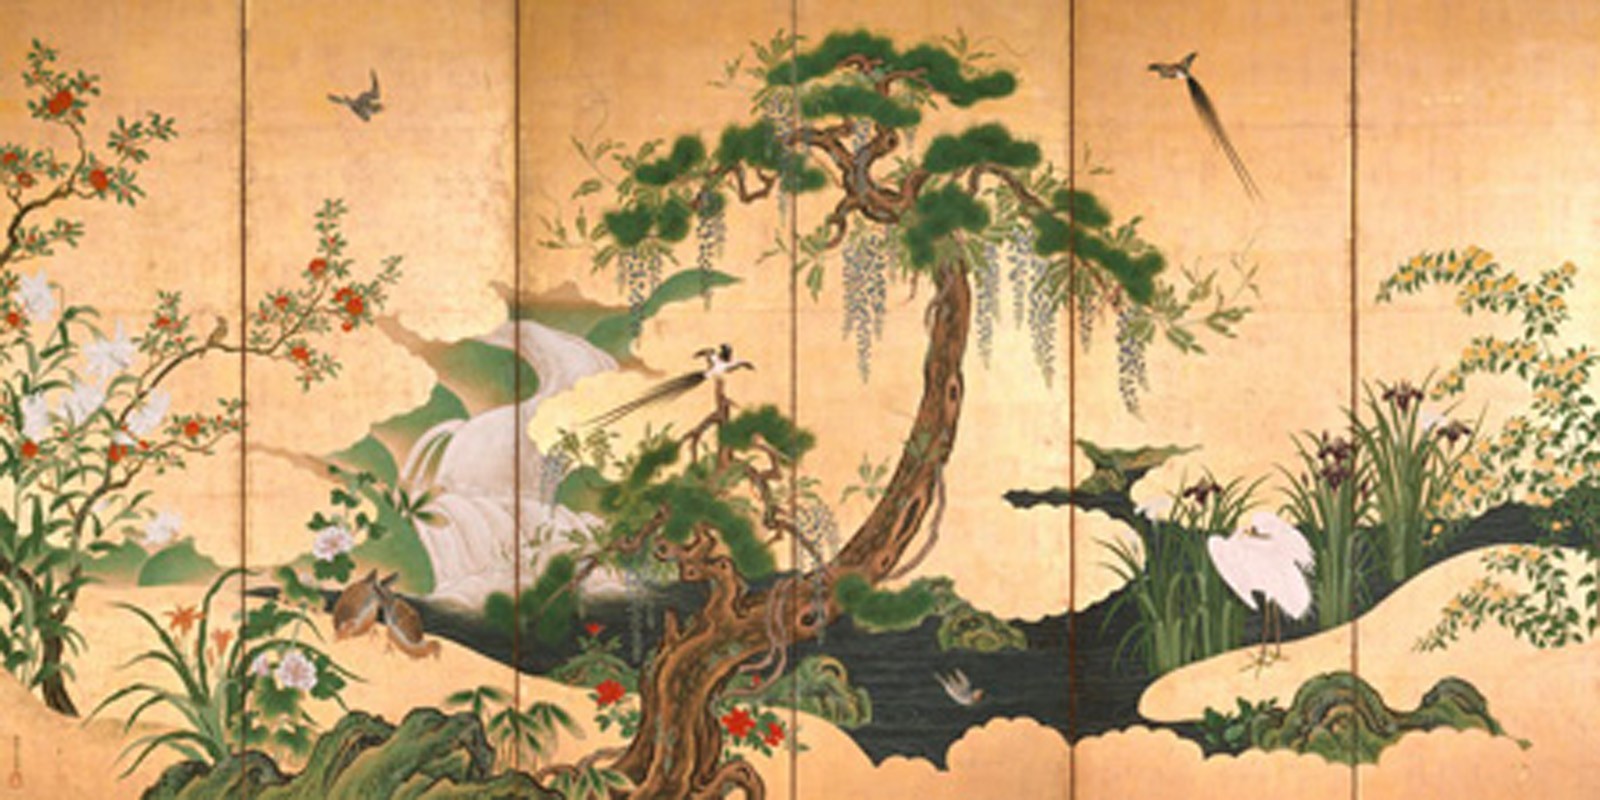 Kano Eino - Birds and Flowers of Spring and Summer